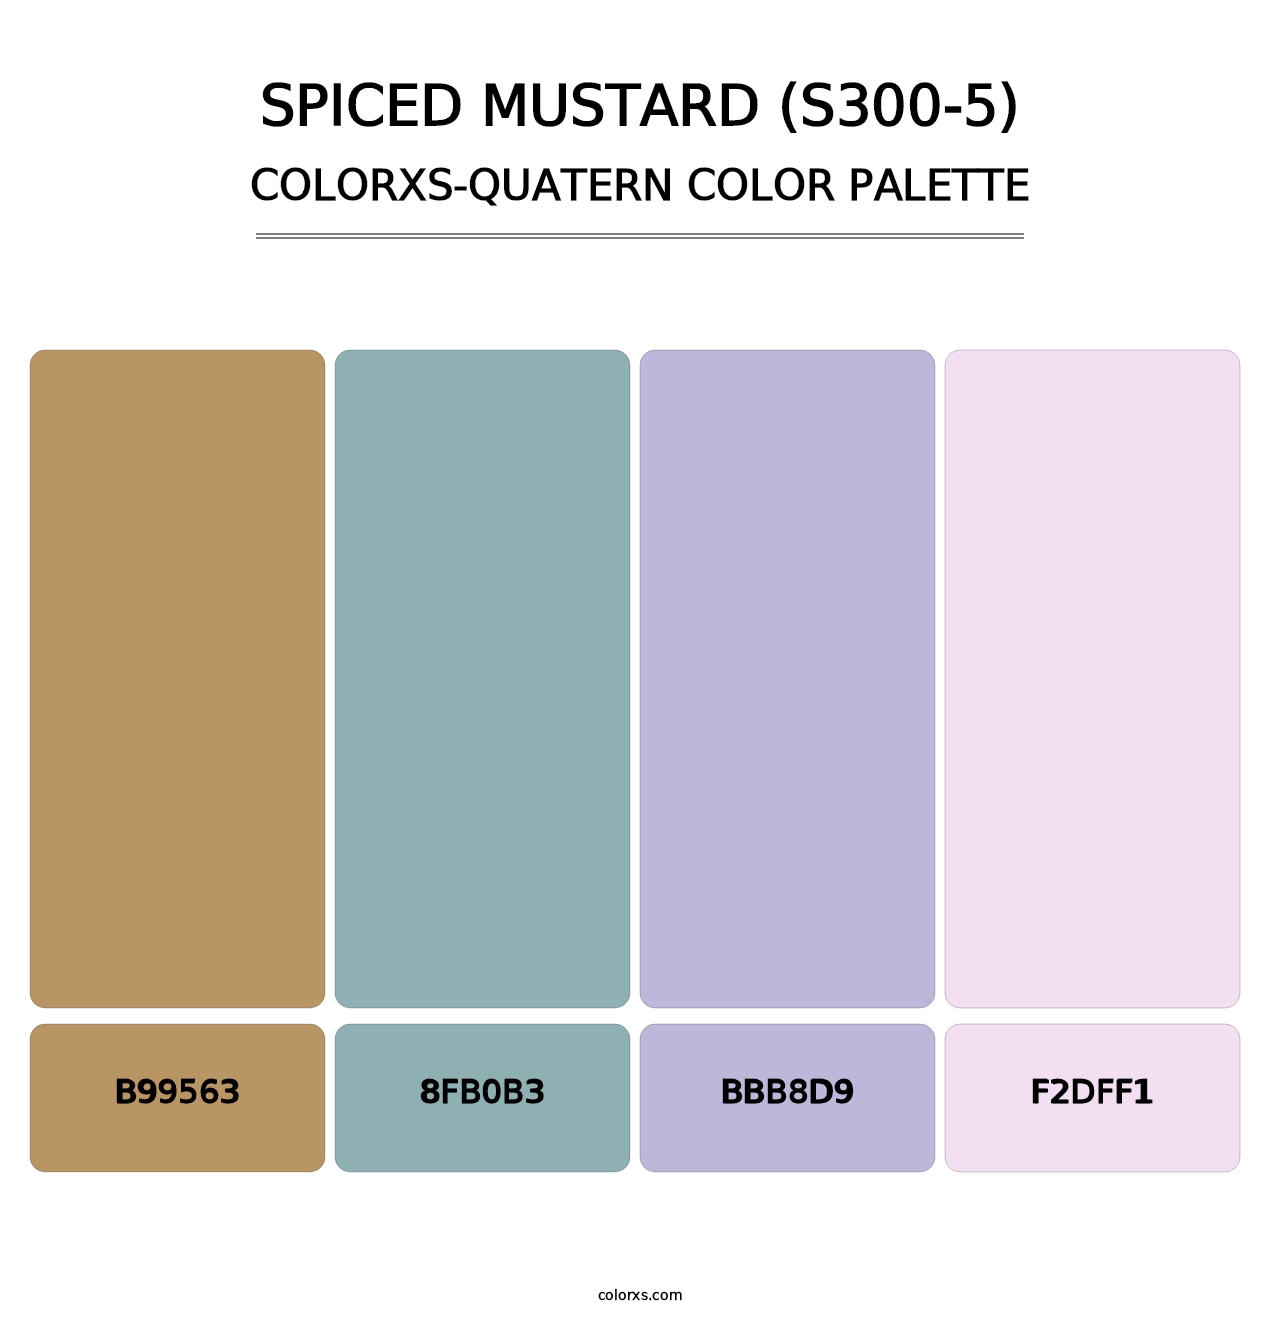 Spiced Mustard (S300-5) - Colorxs Quatern Palette